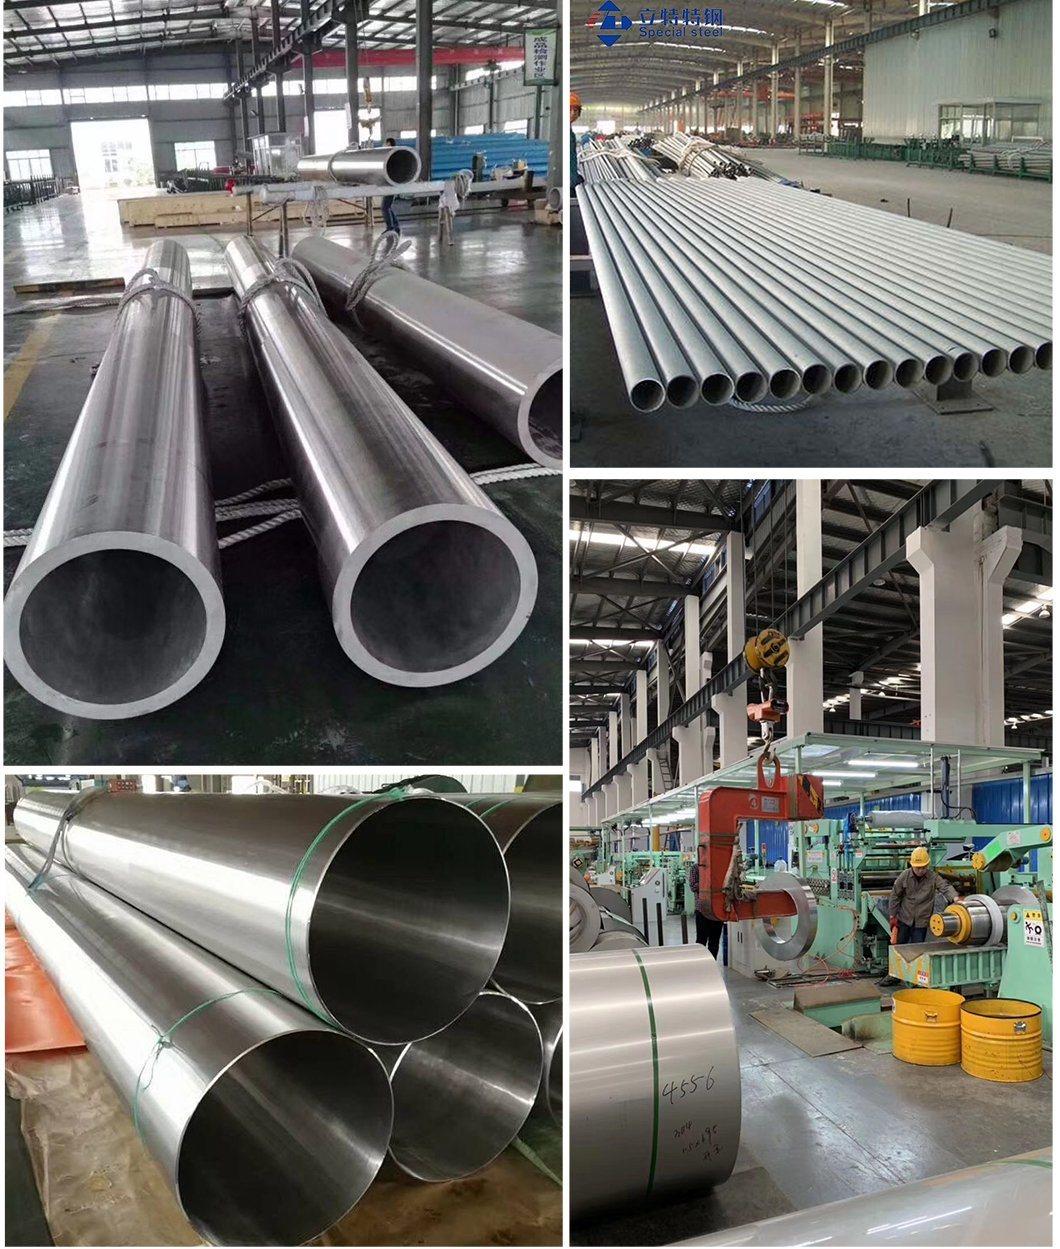 301 304 321 316 317 347 Stainless Steel Welded Pipe Welded Tube Decoration Tube